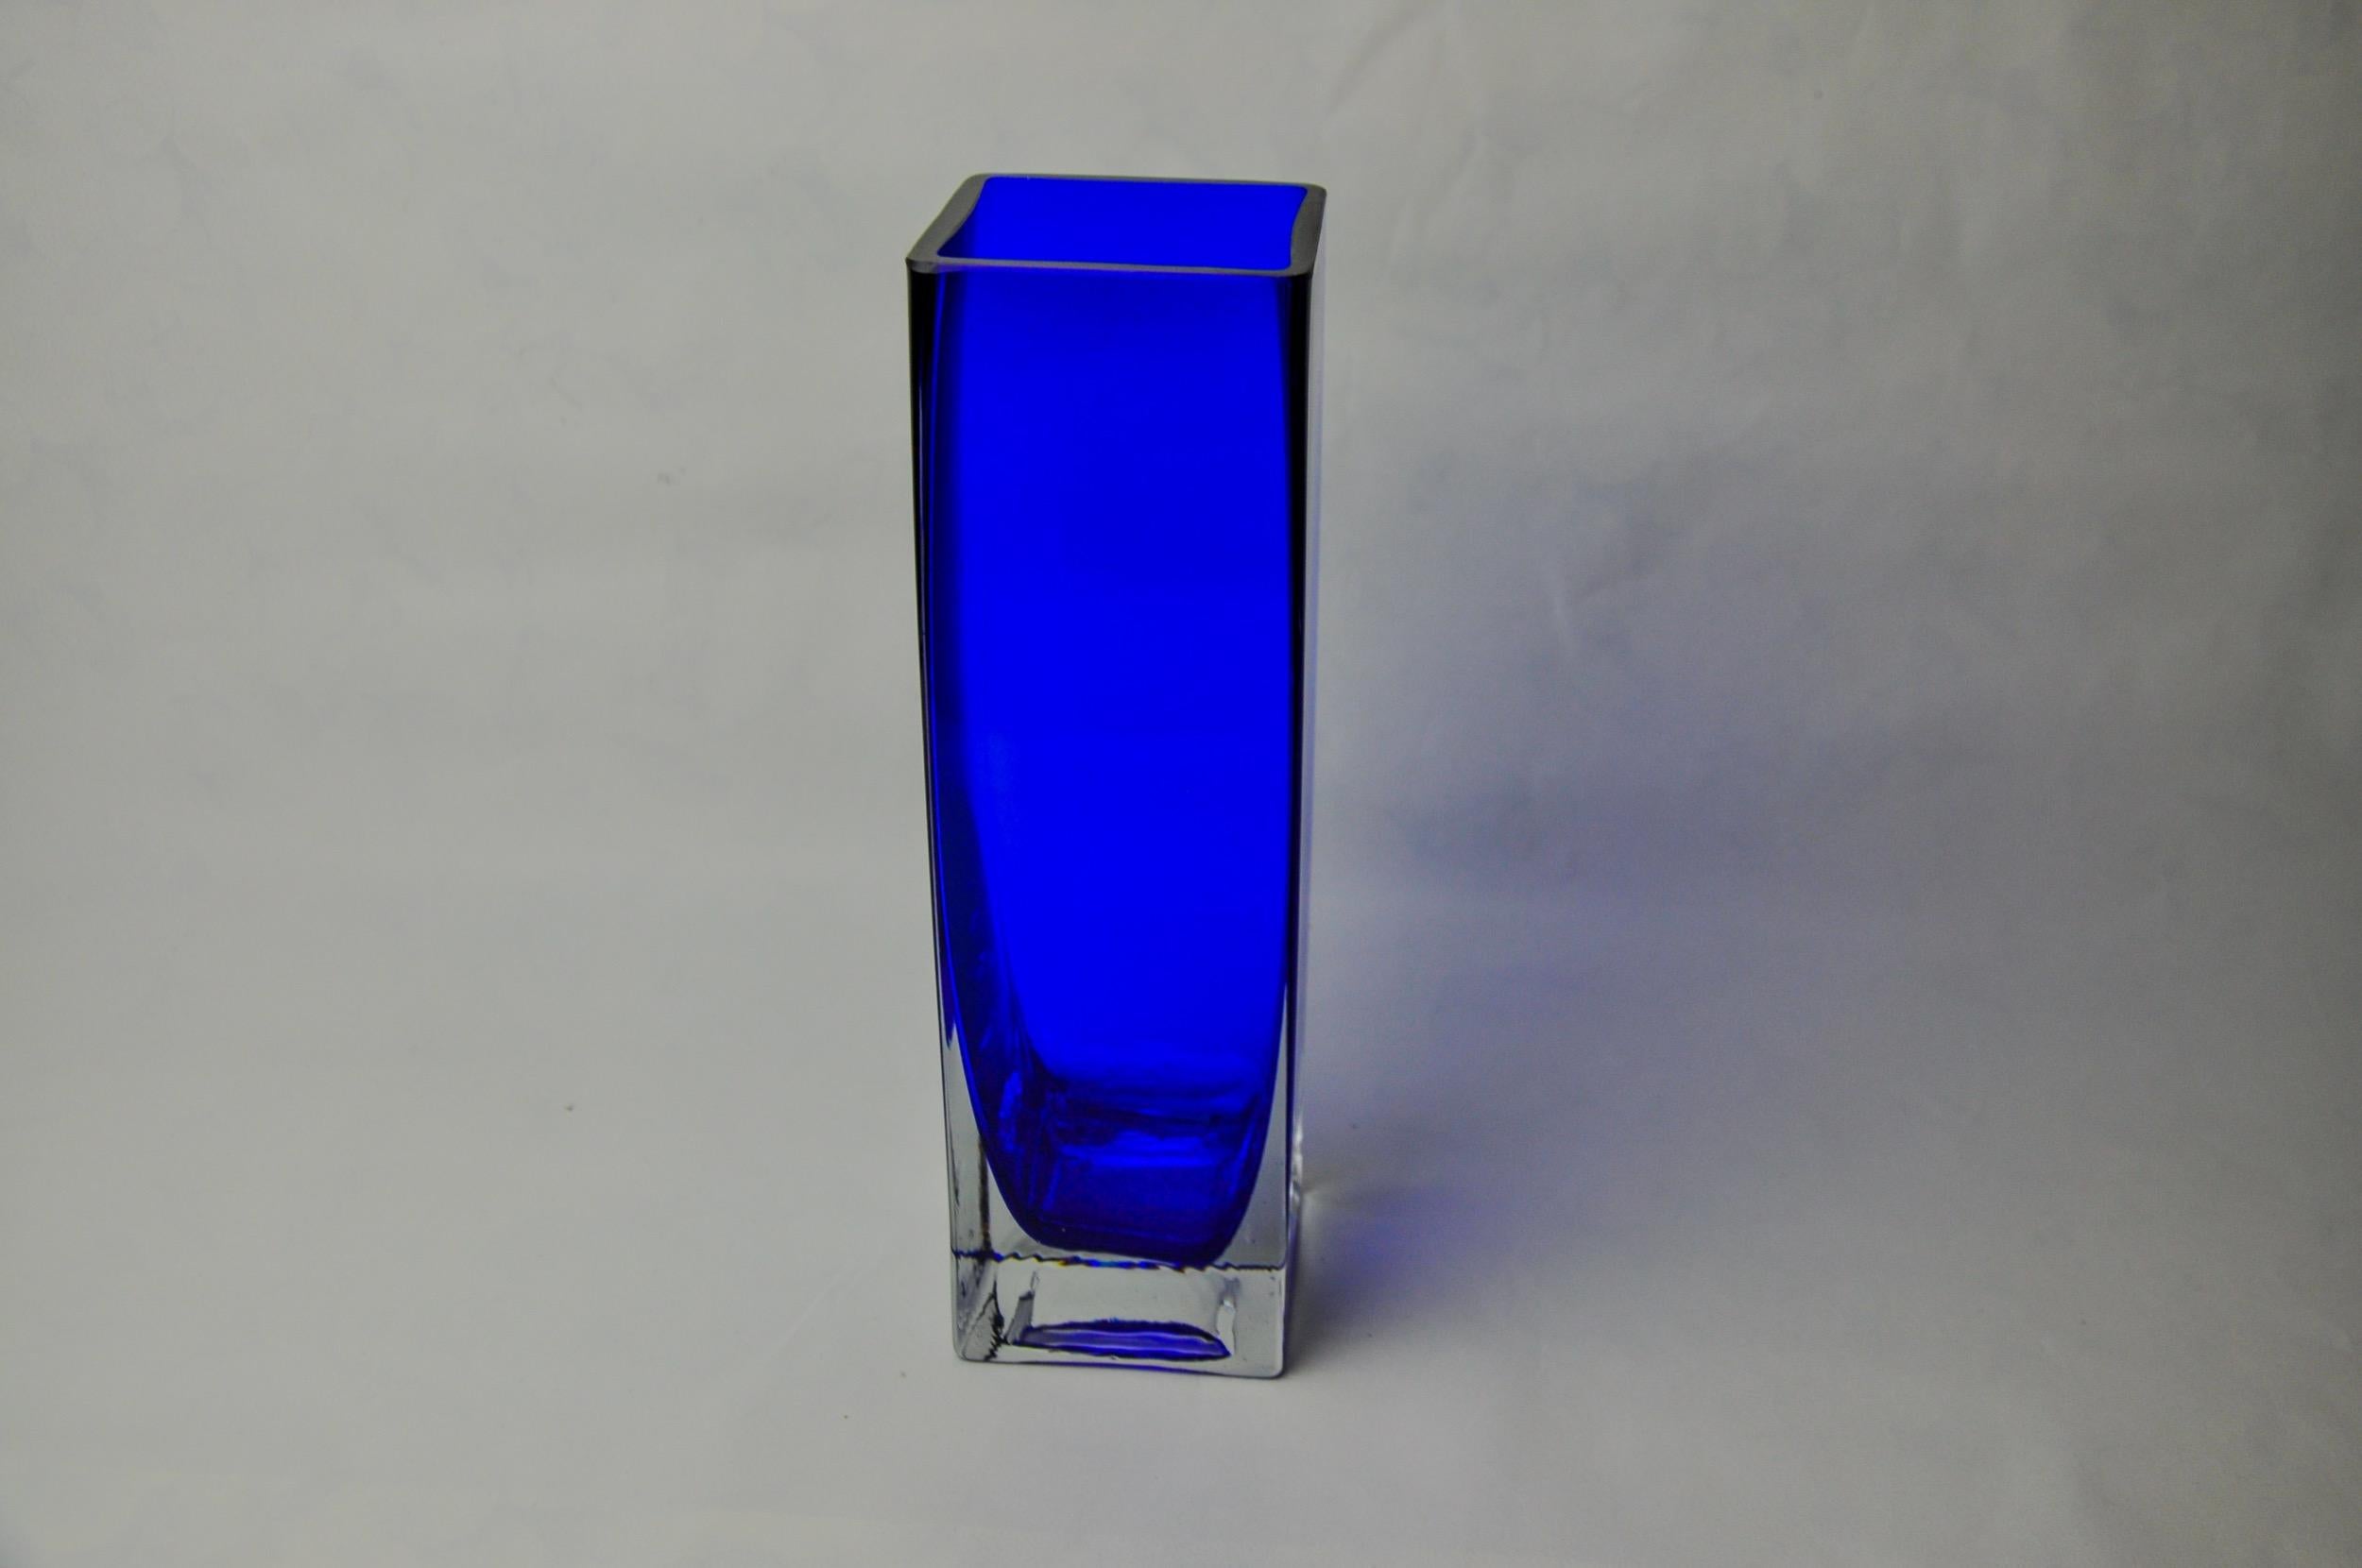 Hollywood Regency Sommerso Vase by Petr hora, blue glass, Czech Republic, 1970 For Sale